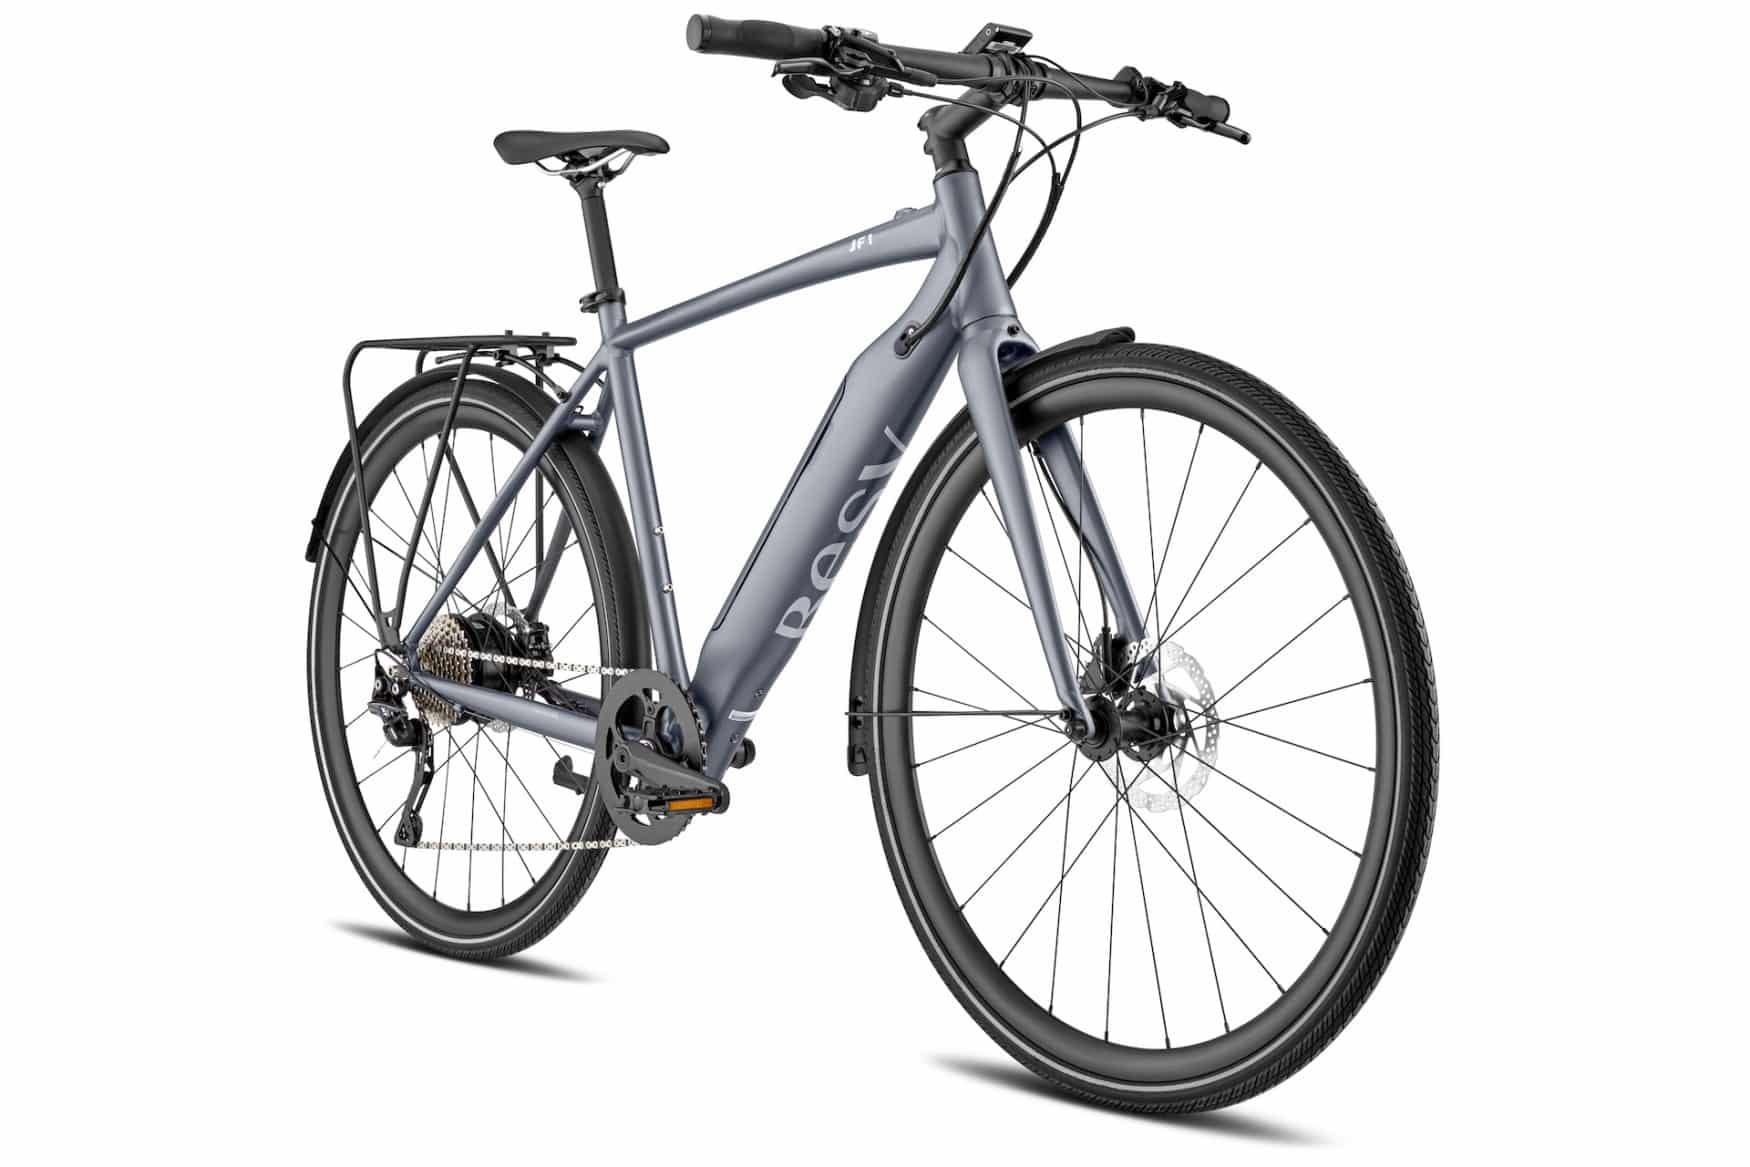 JF 1 MY21 Innovative and Reliable E-Bike | BESV